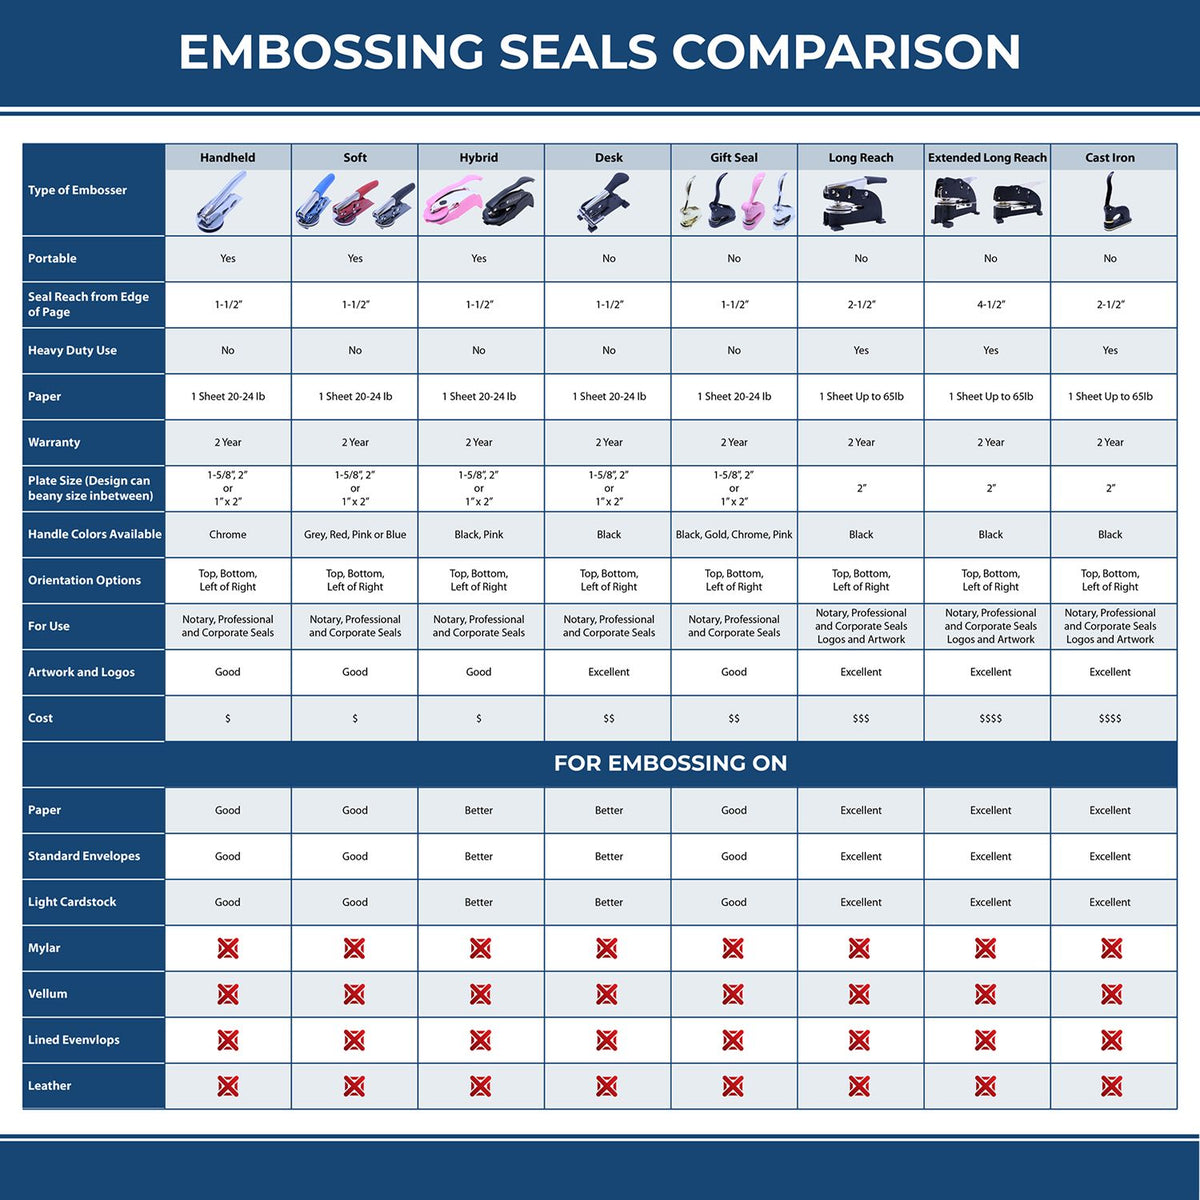 A comparison chart for the different types of mount models available for the Handheld Florida Professional Geologist Embosser